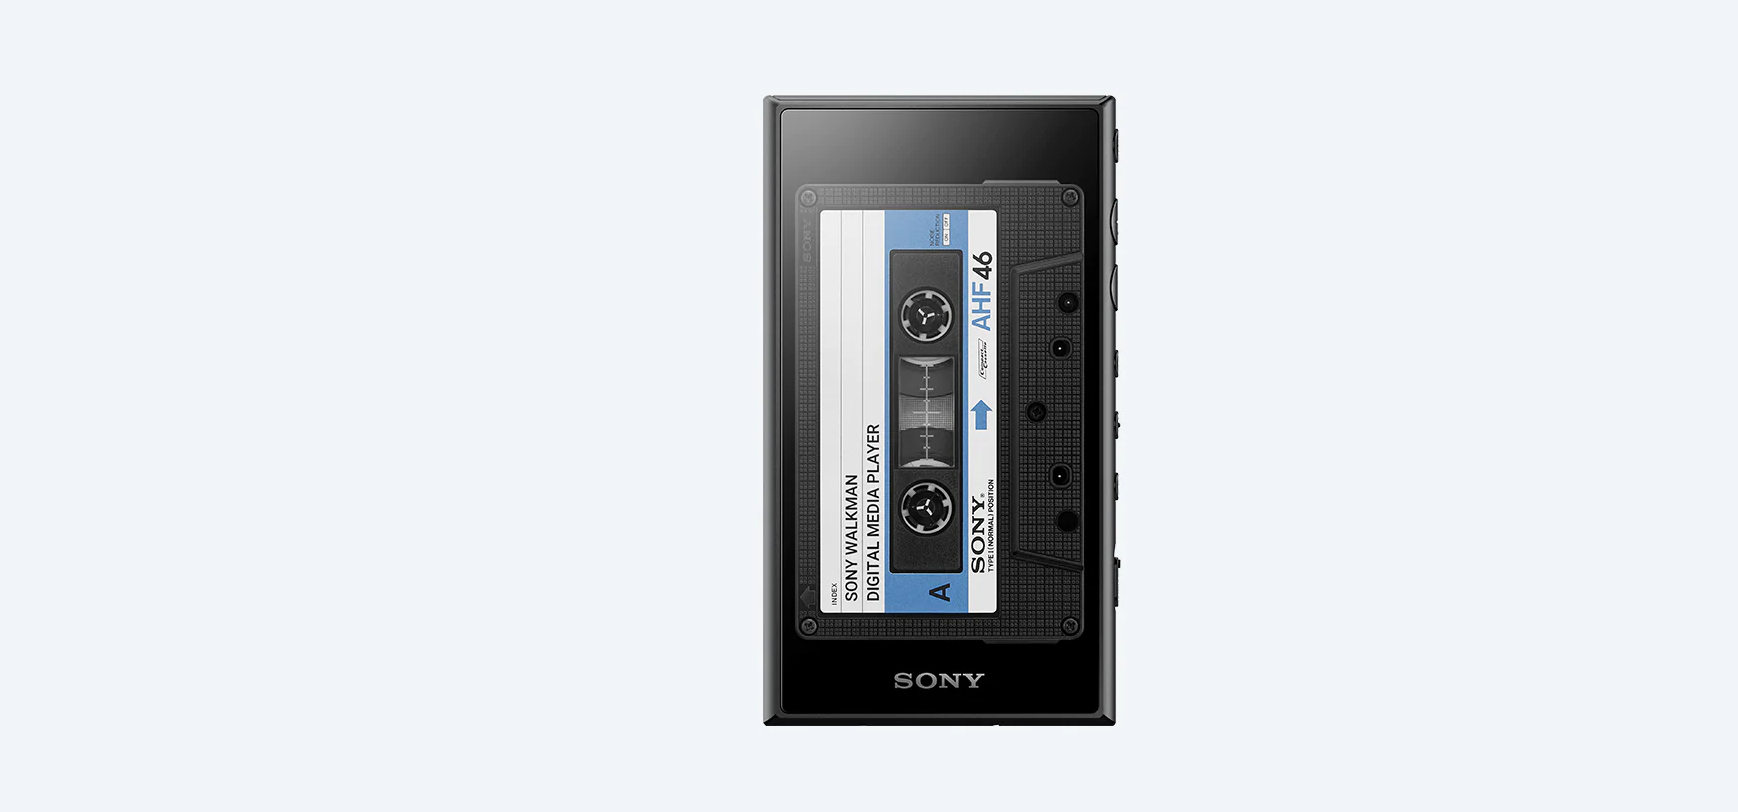 PHOTO: The Sony A100 walkman A series is seen here.